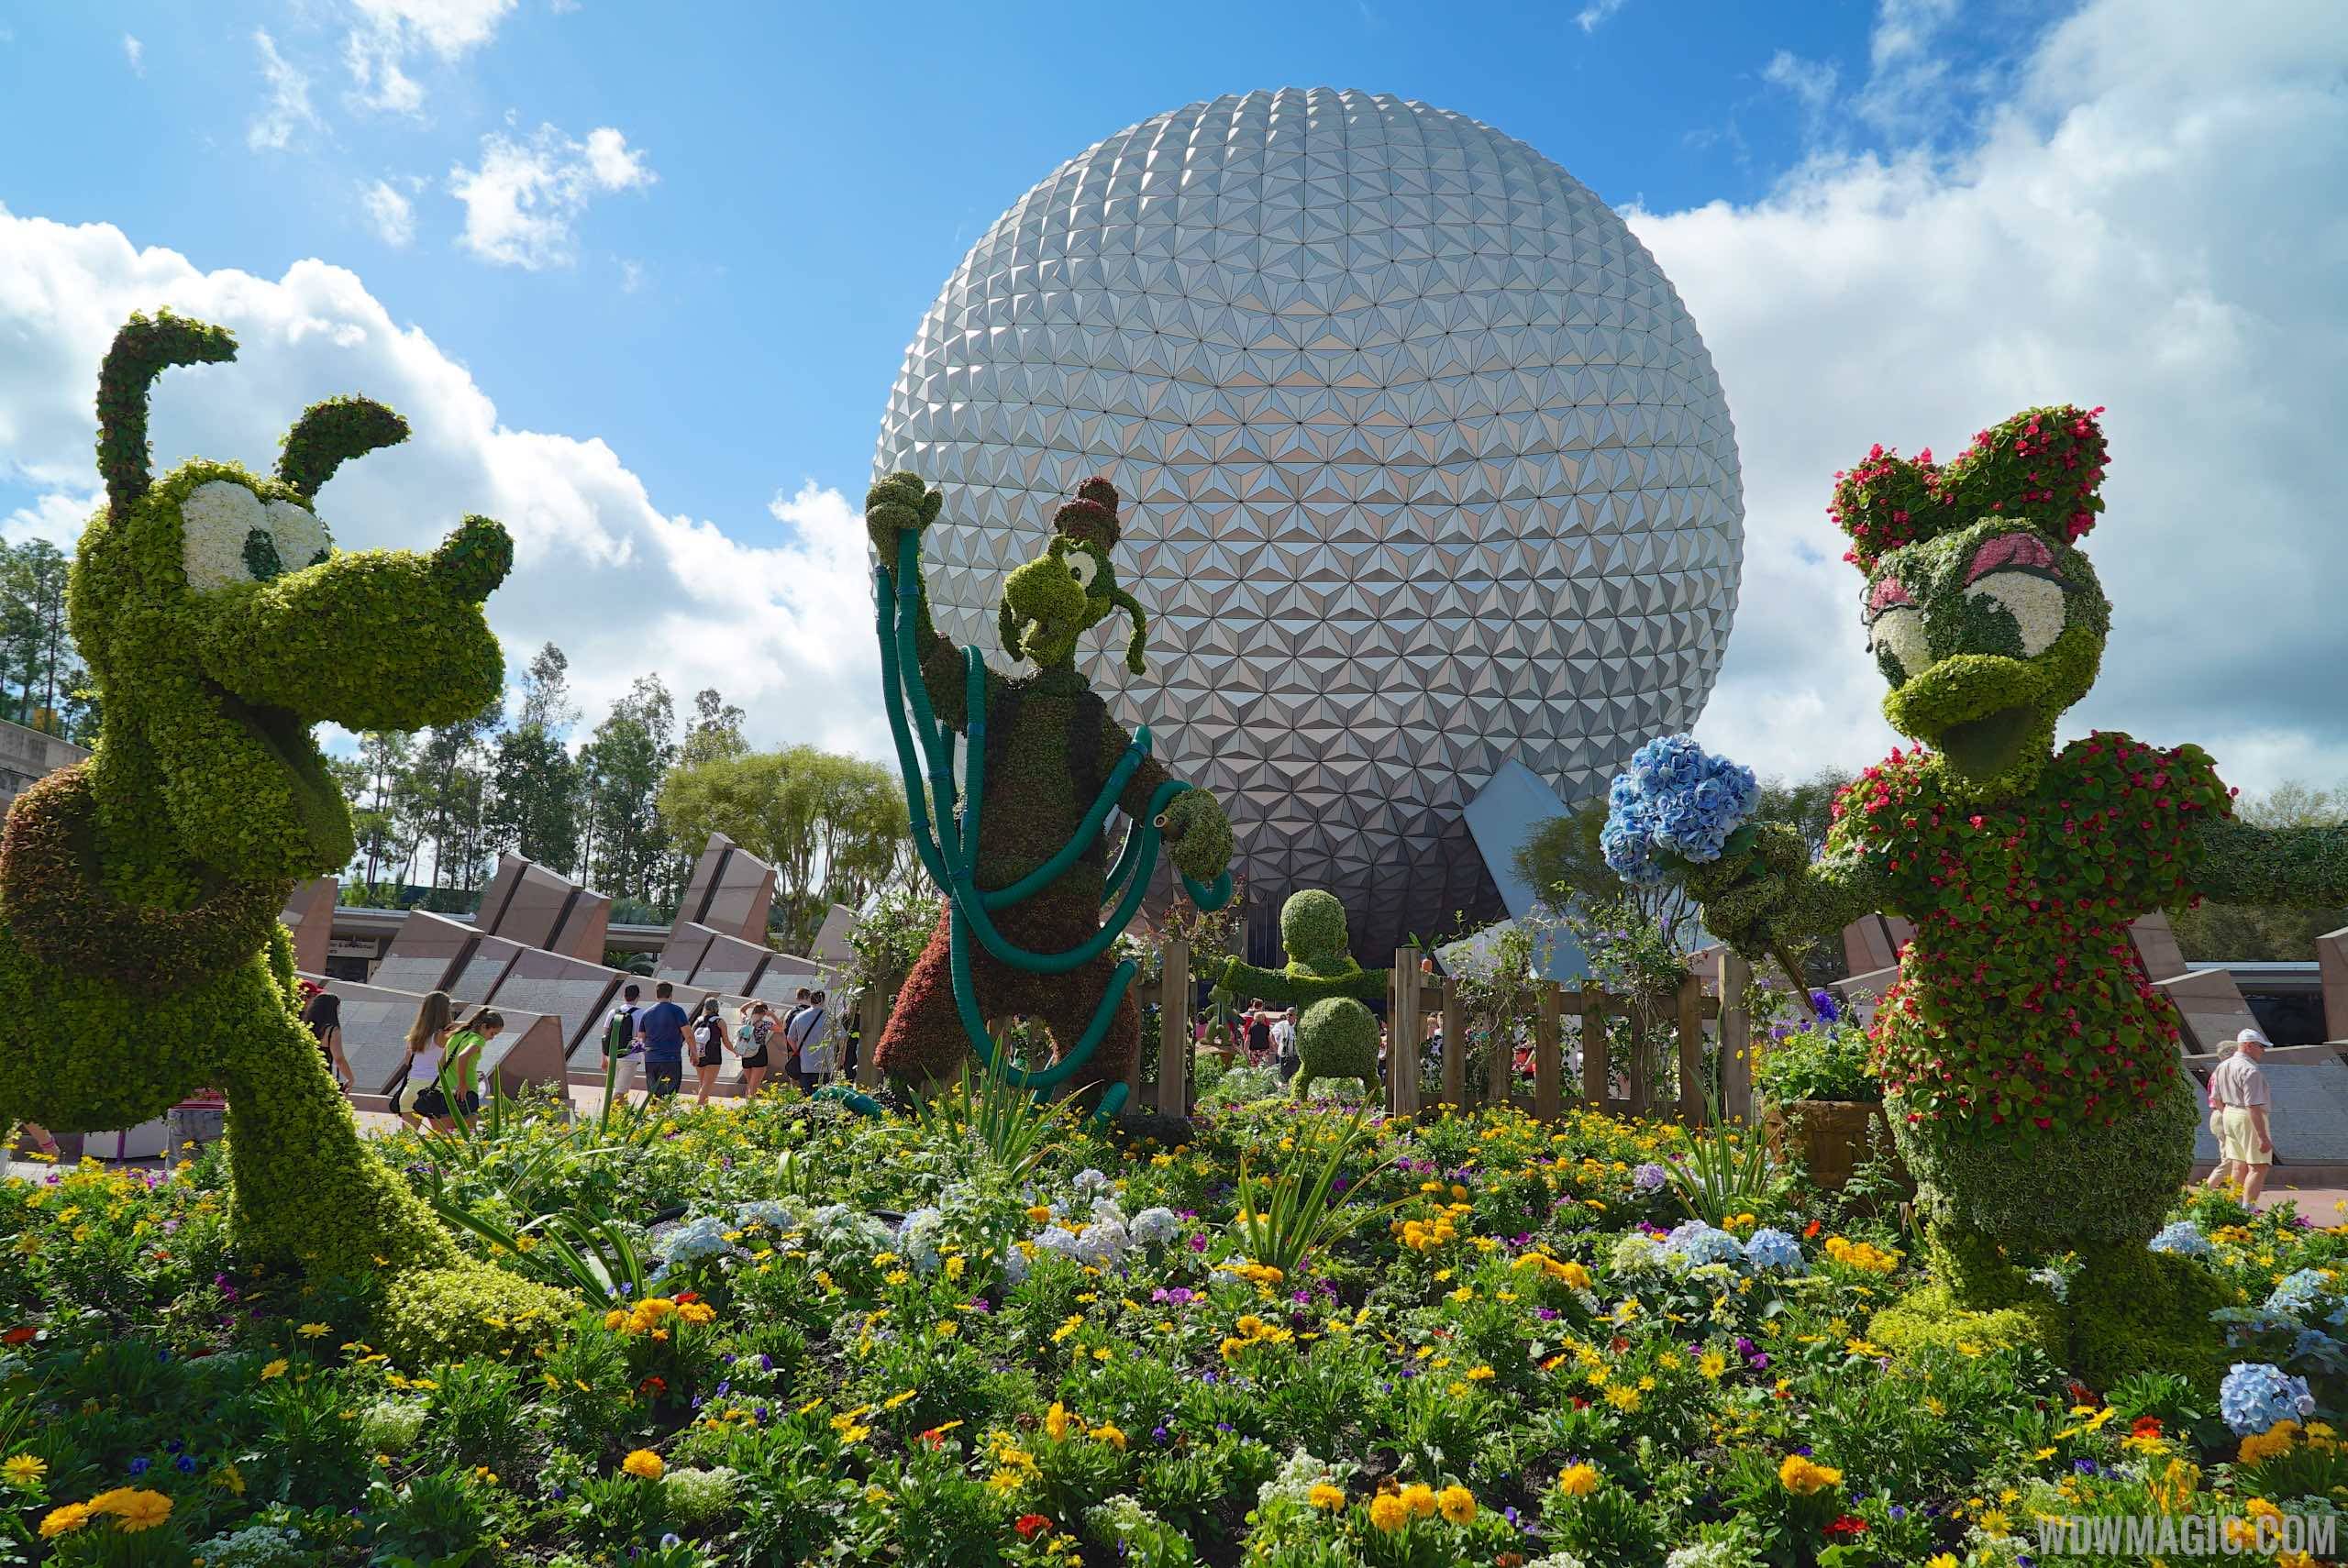 2015 Epcot Flower and Garden Festival - Main entrance topiary